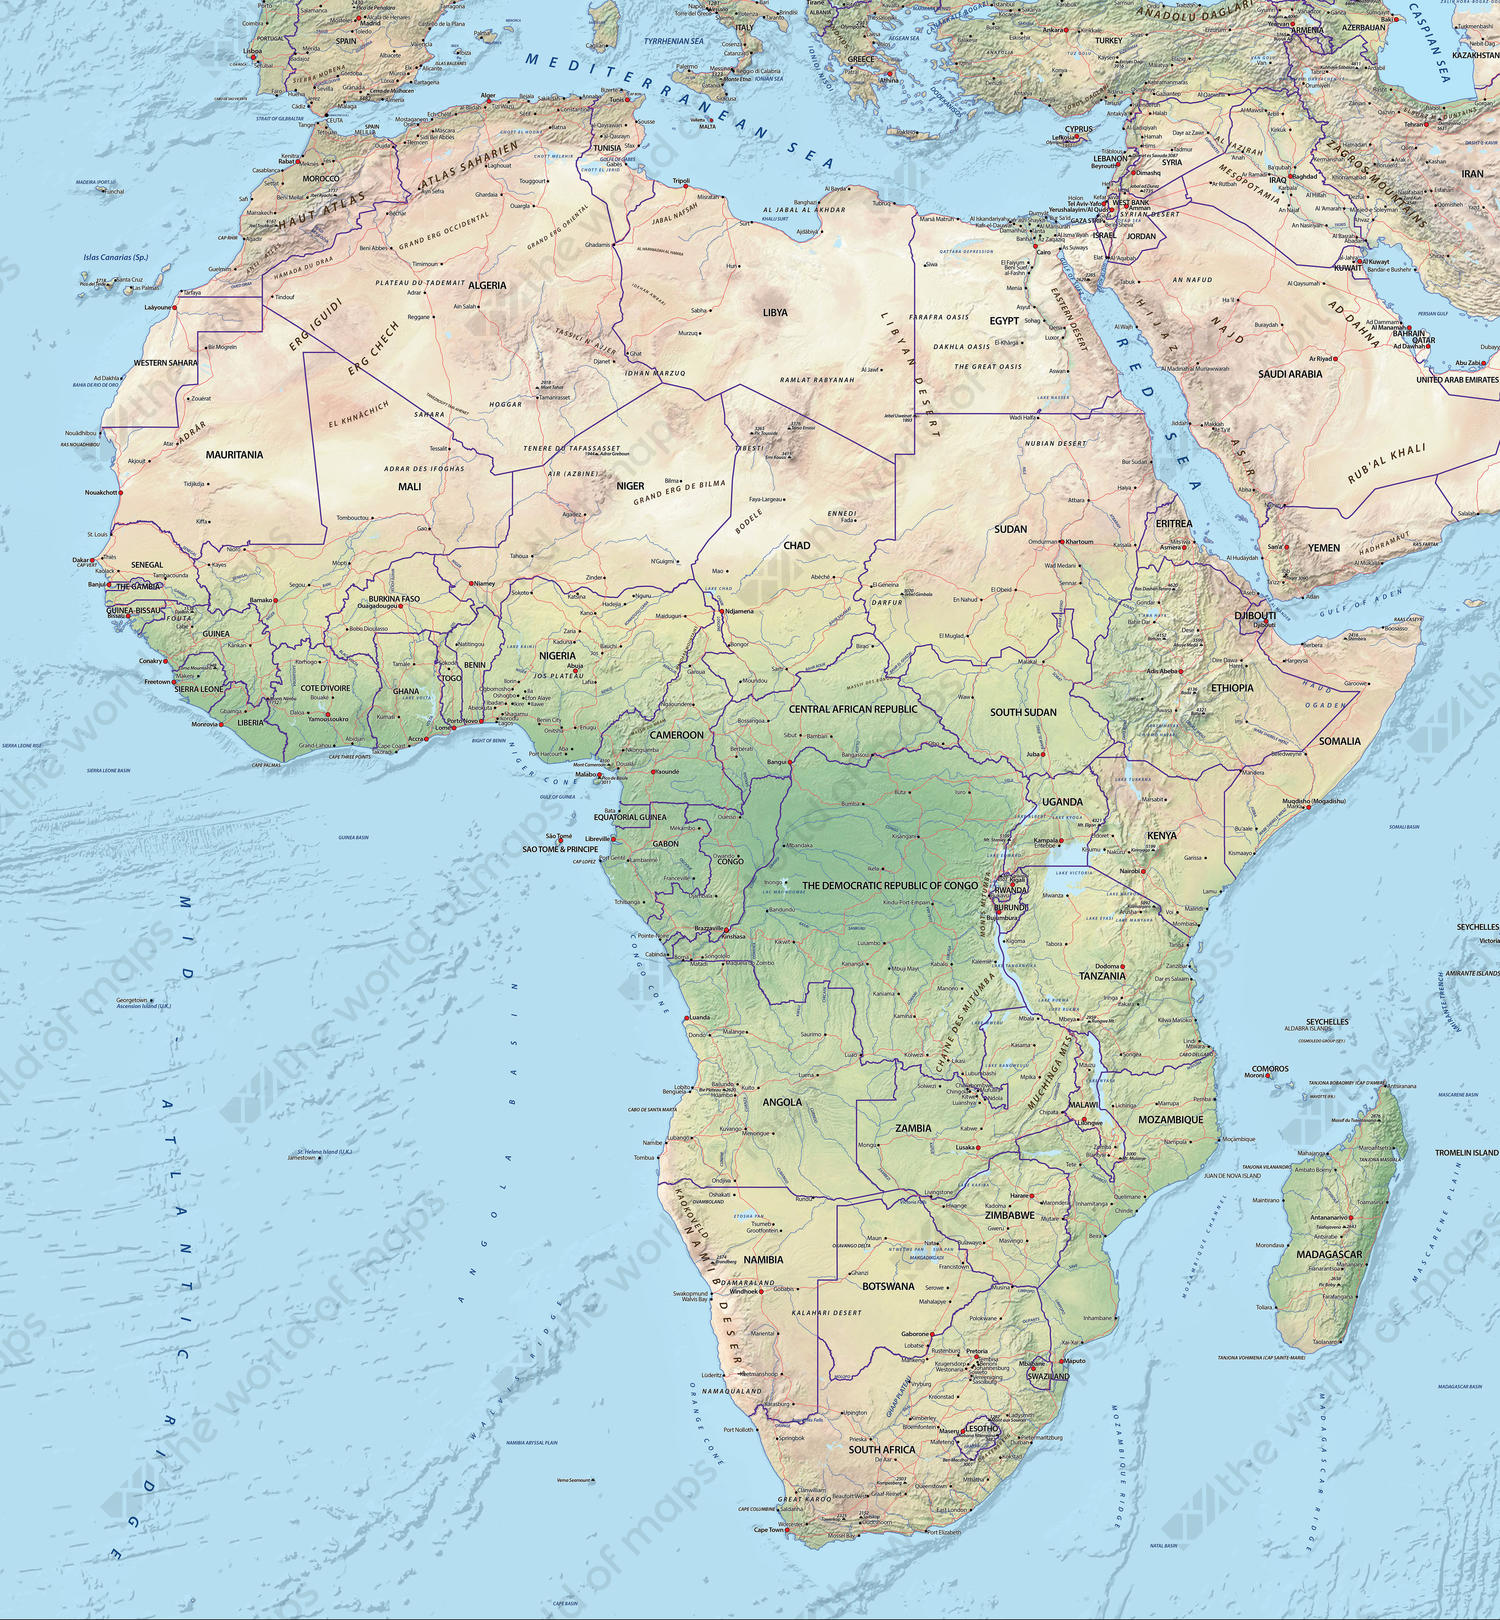 Digital Map Africa Physical 628 | The World of Maps.com